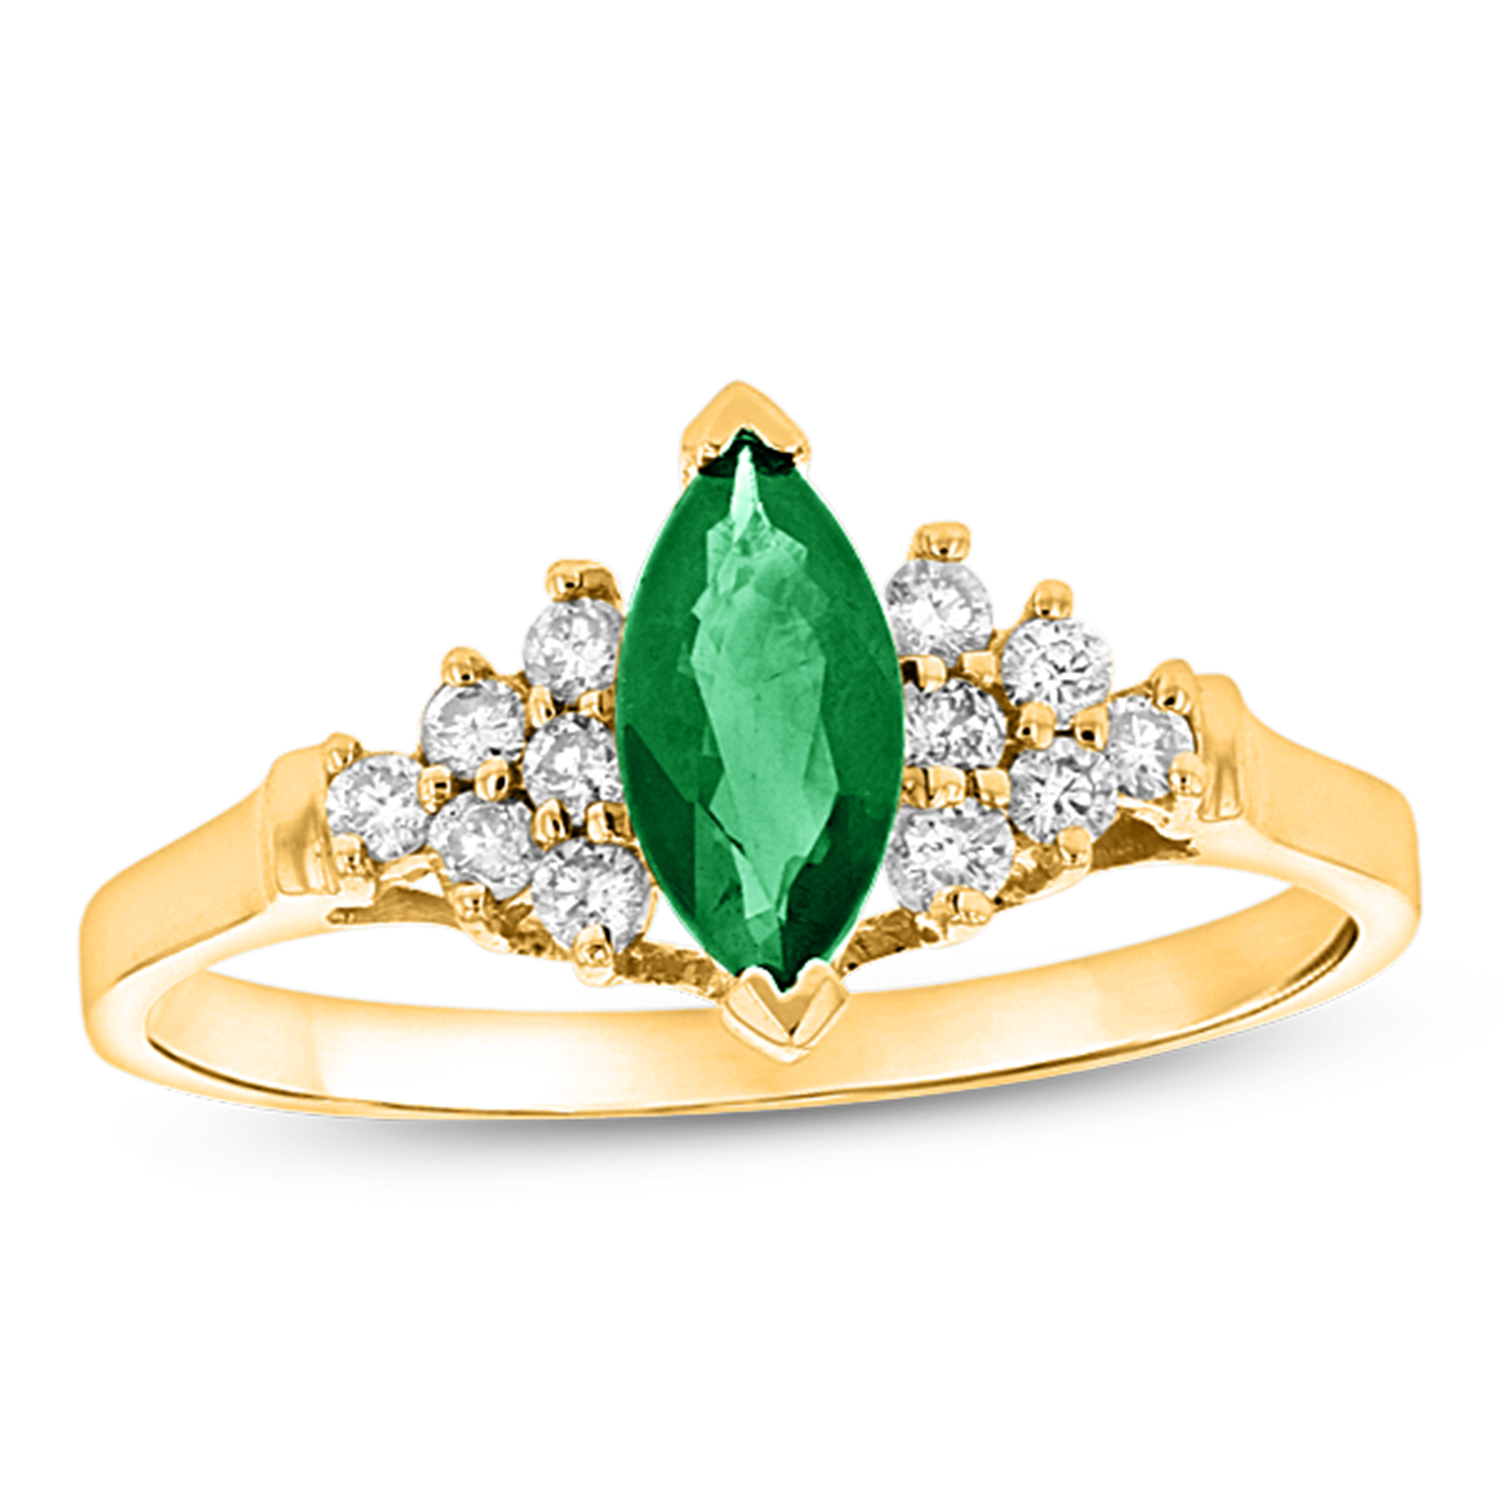 View 0.19ctw Diamond and Marquis Emerald Ring in 14k Yellow Gold